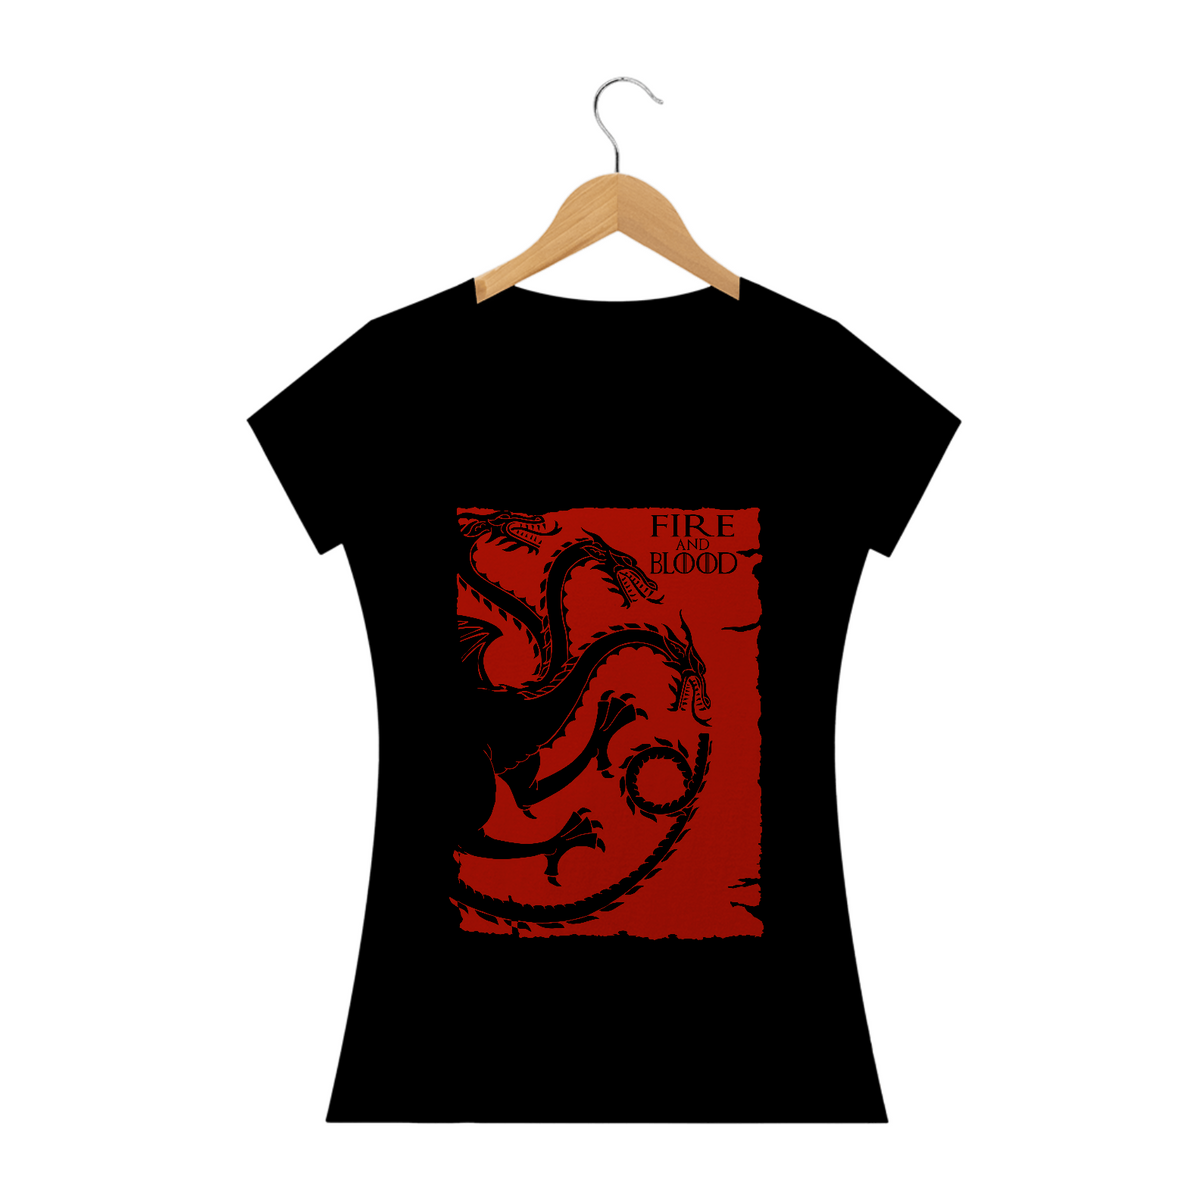 Nome do produto: Baby Long Game of Thrones Fire And Blood